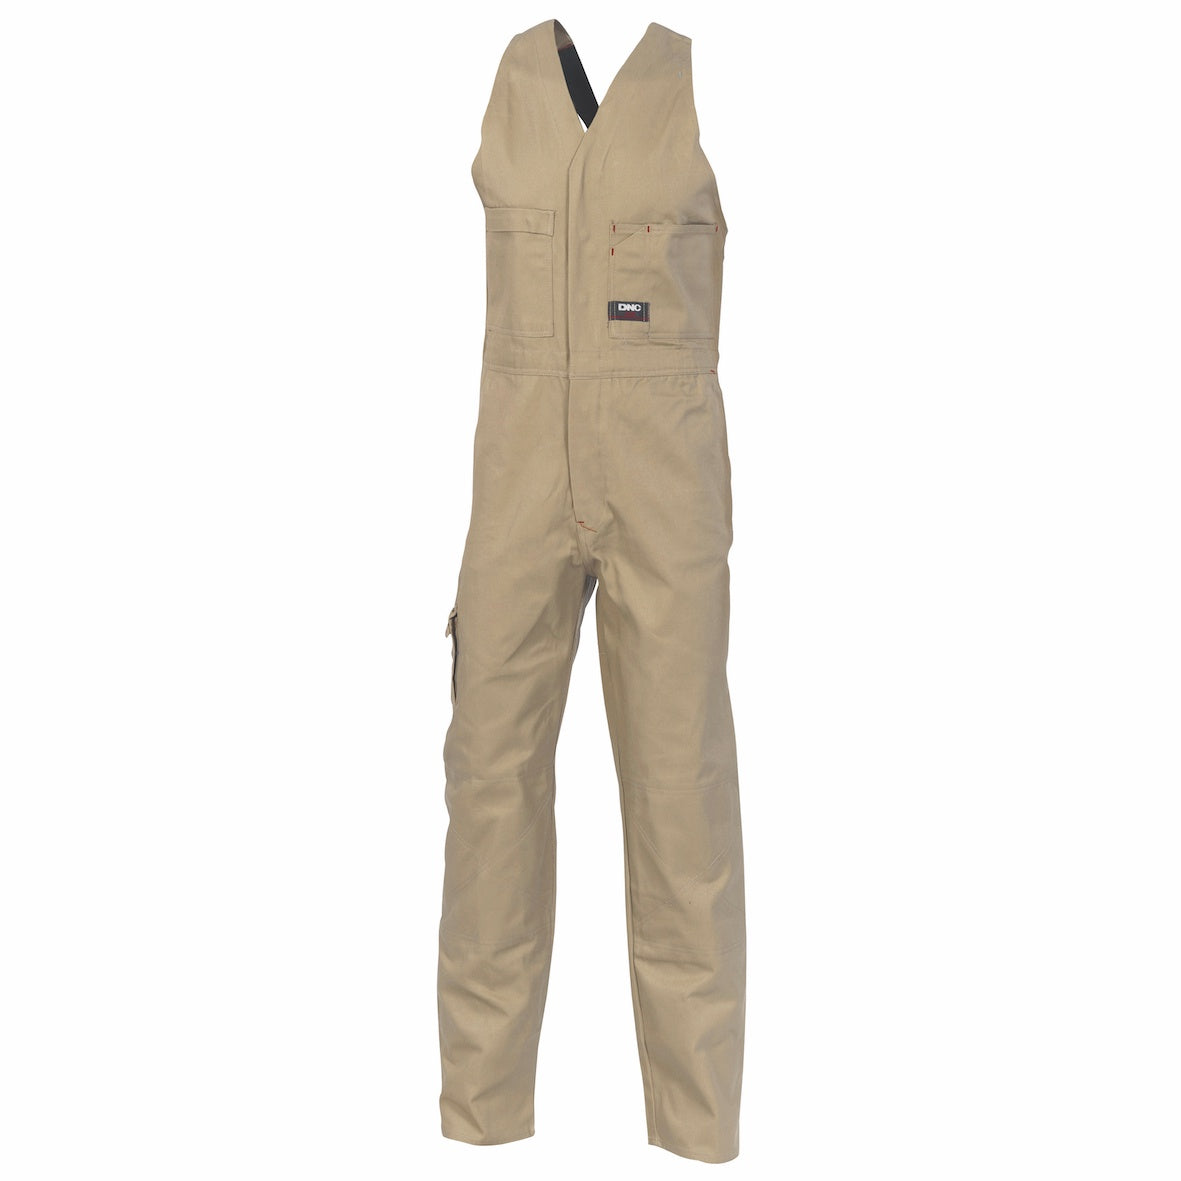 DNC - 3121 Action Back Cotton Drill Overall